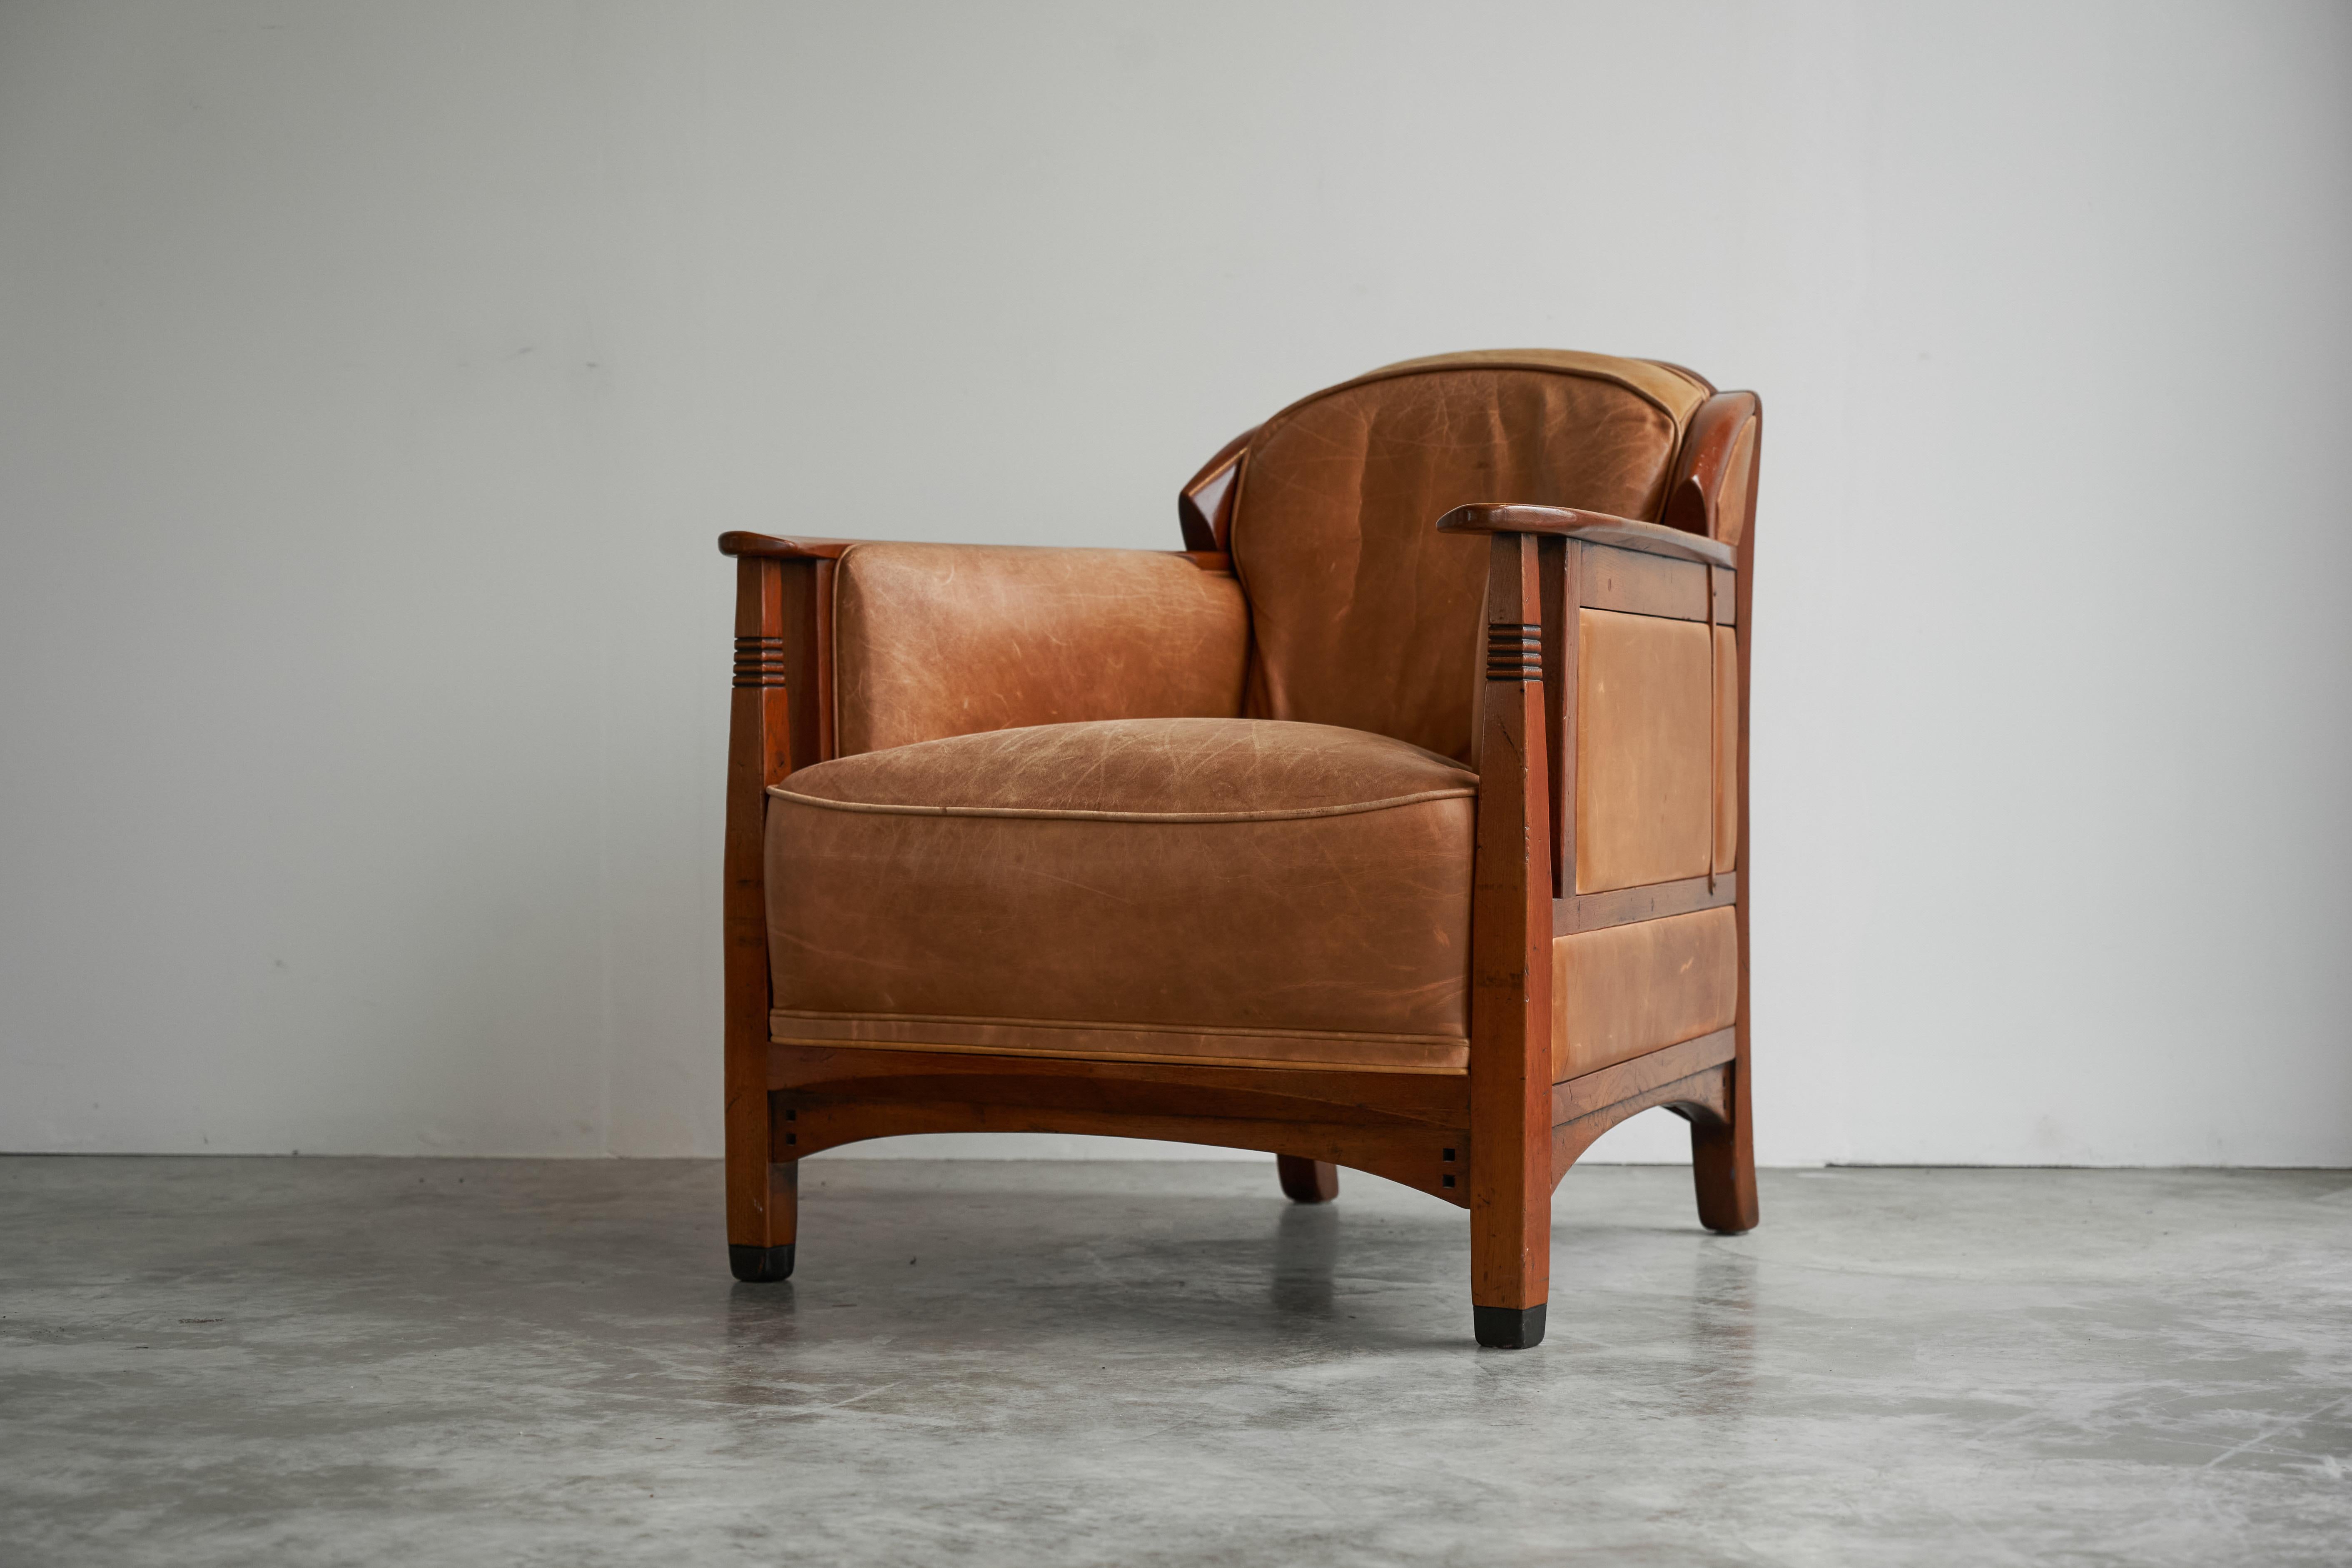 Frits Schuitema Art Deco Armchair in Solid Oak and Cognac Leather, The Netherlands, late 20th / beginning 21st century.

This luxurious Art Deco armchair was designed and made by Frits Schuitema, in solid oak and cognac leather. The renowned